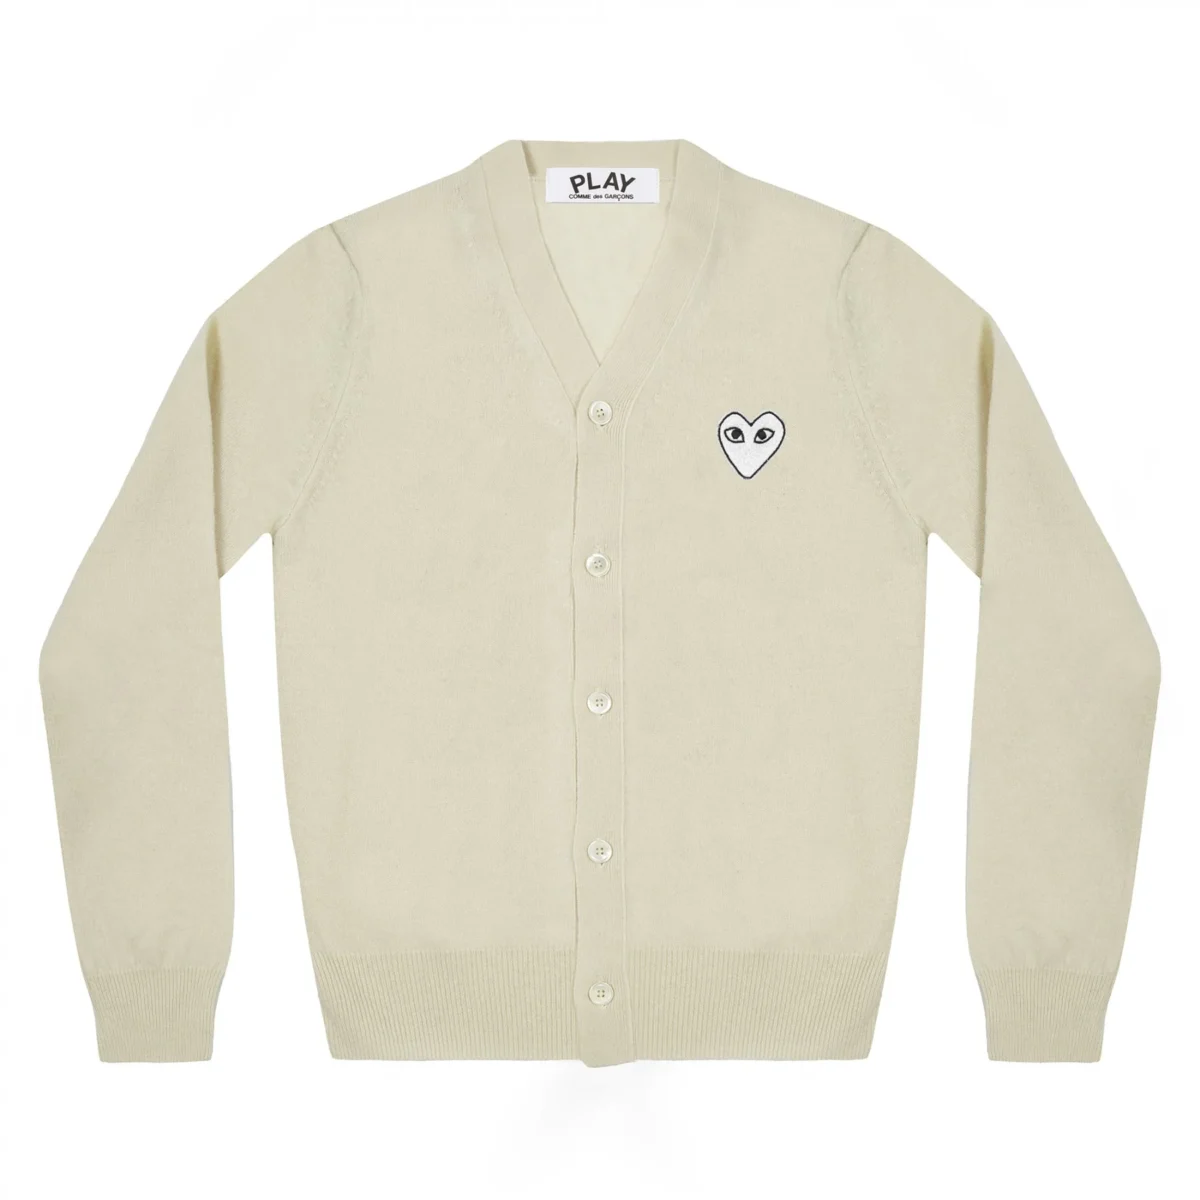 CDG Play Men’s Cardigan White Heart Natural Series off White